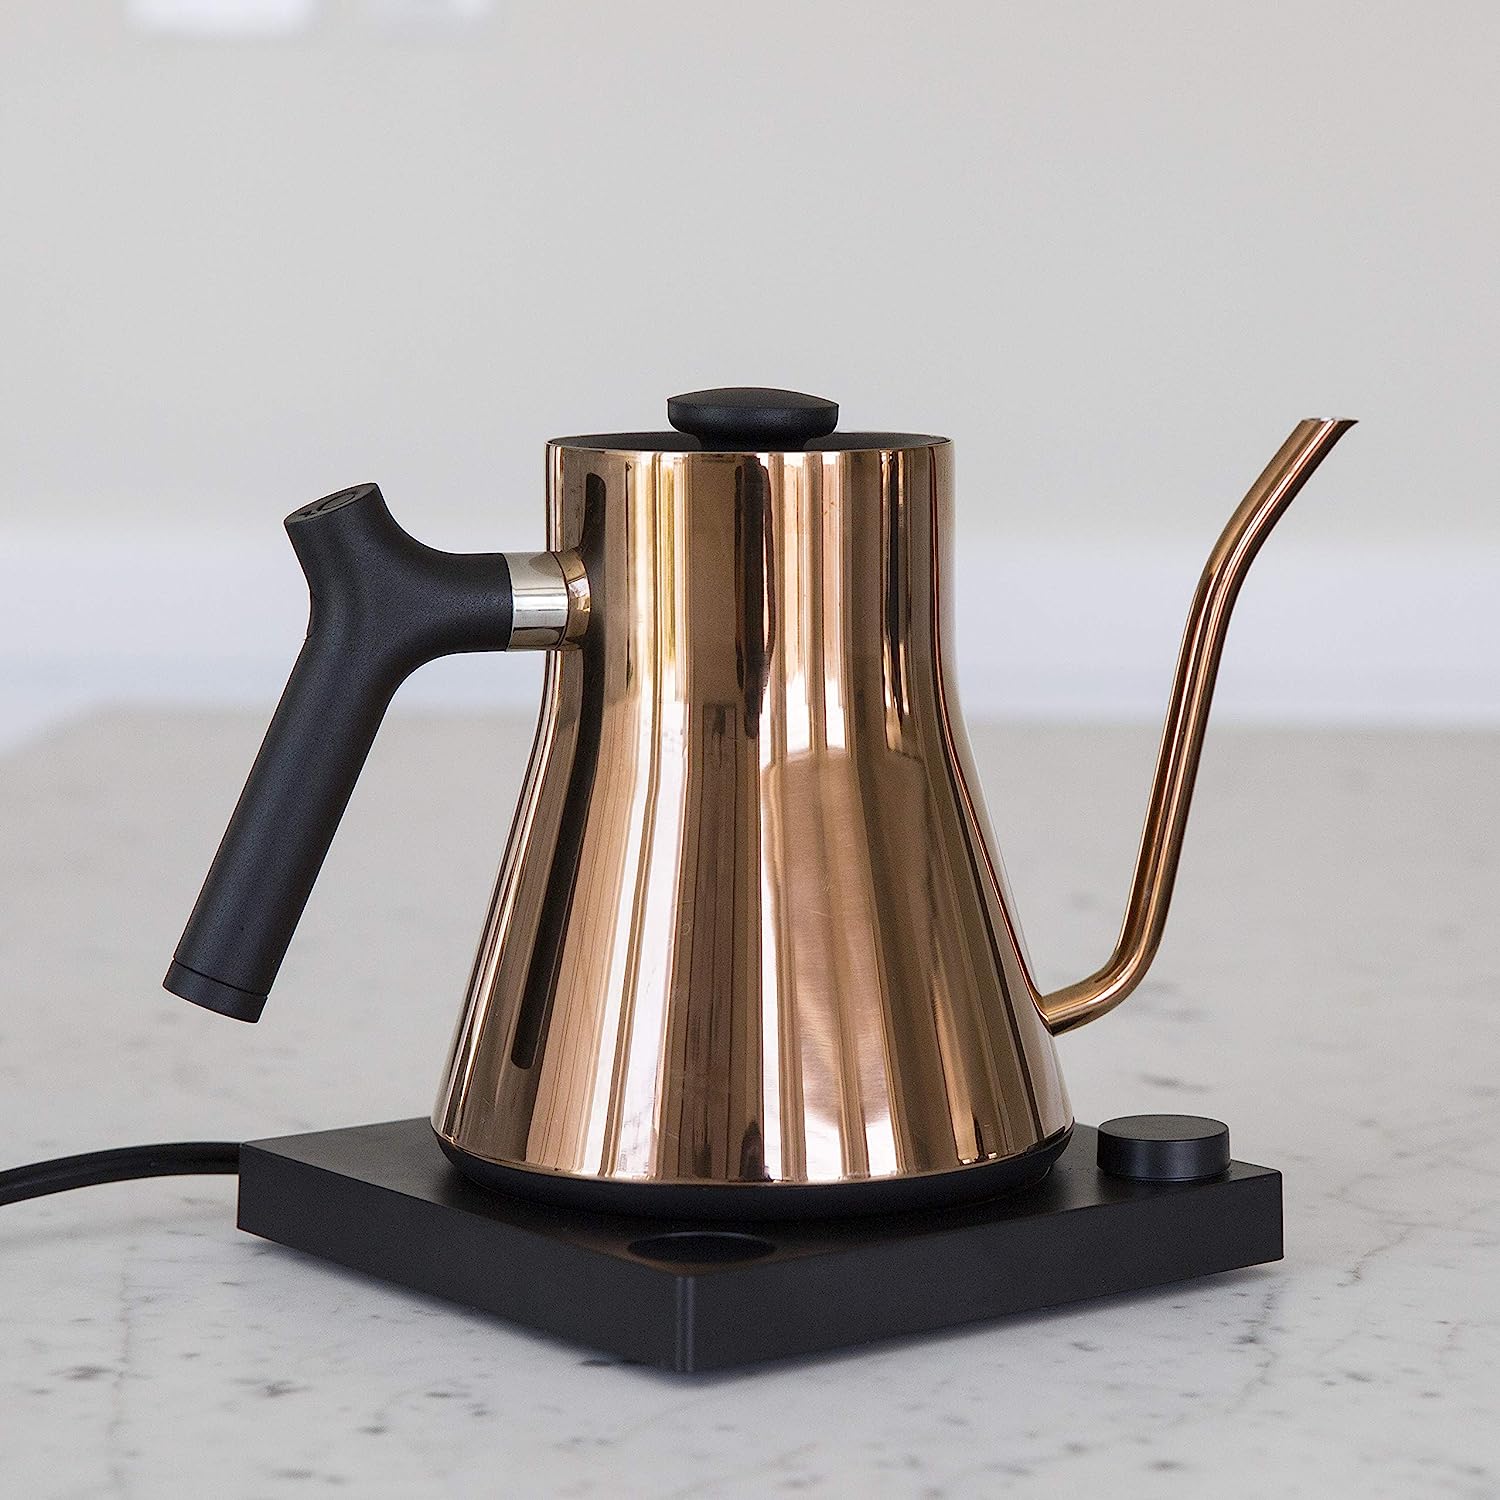 Fellow Stagg EKG Electric Gooseneck Kettle - Pour-Over Coffee and Tea Kettle  - Stainless Steel Boiler - Quick Heating Electric Kettles for Boiling Water  - Polished Copper